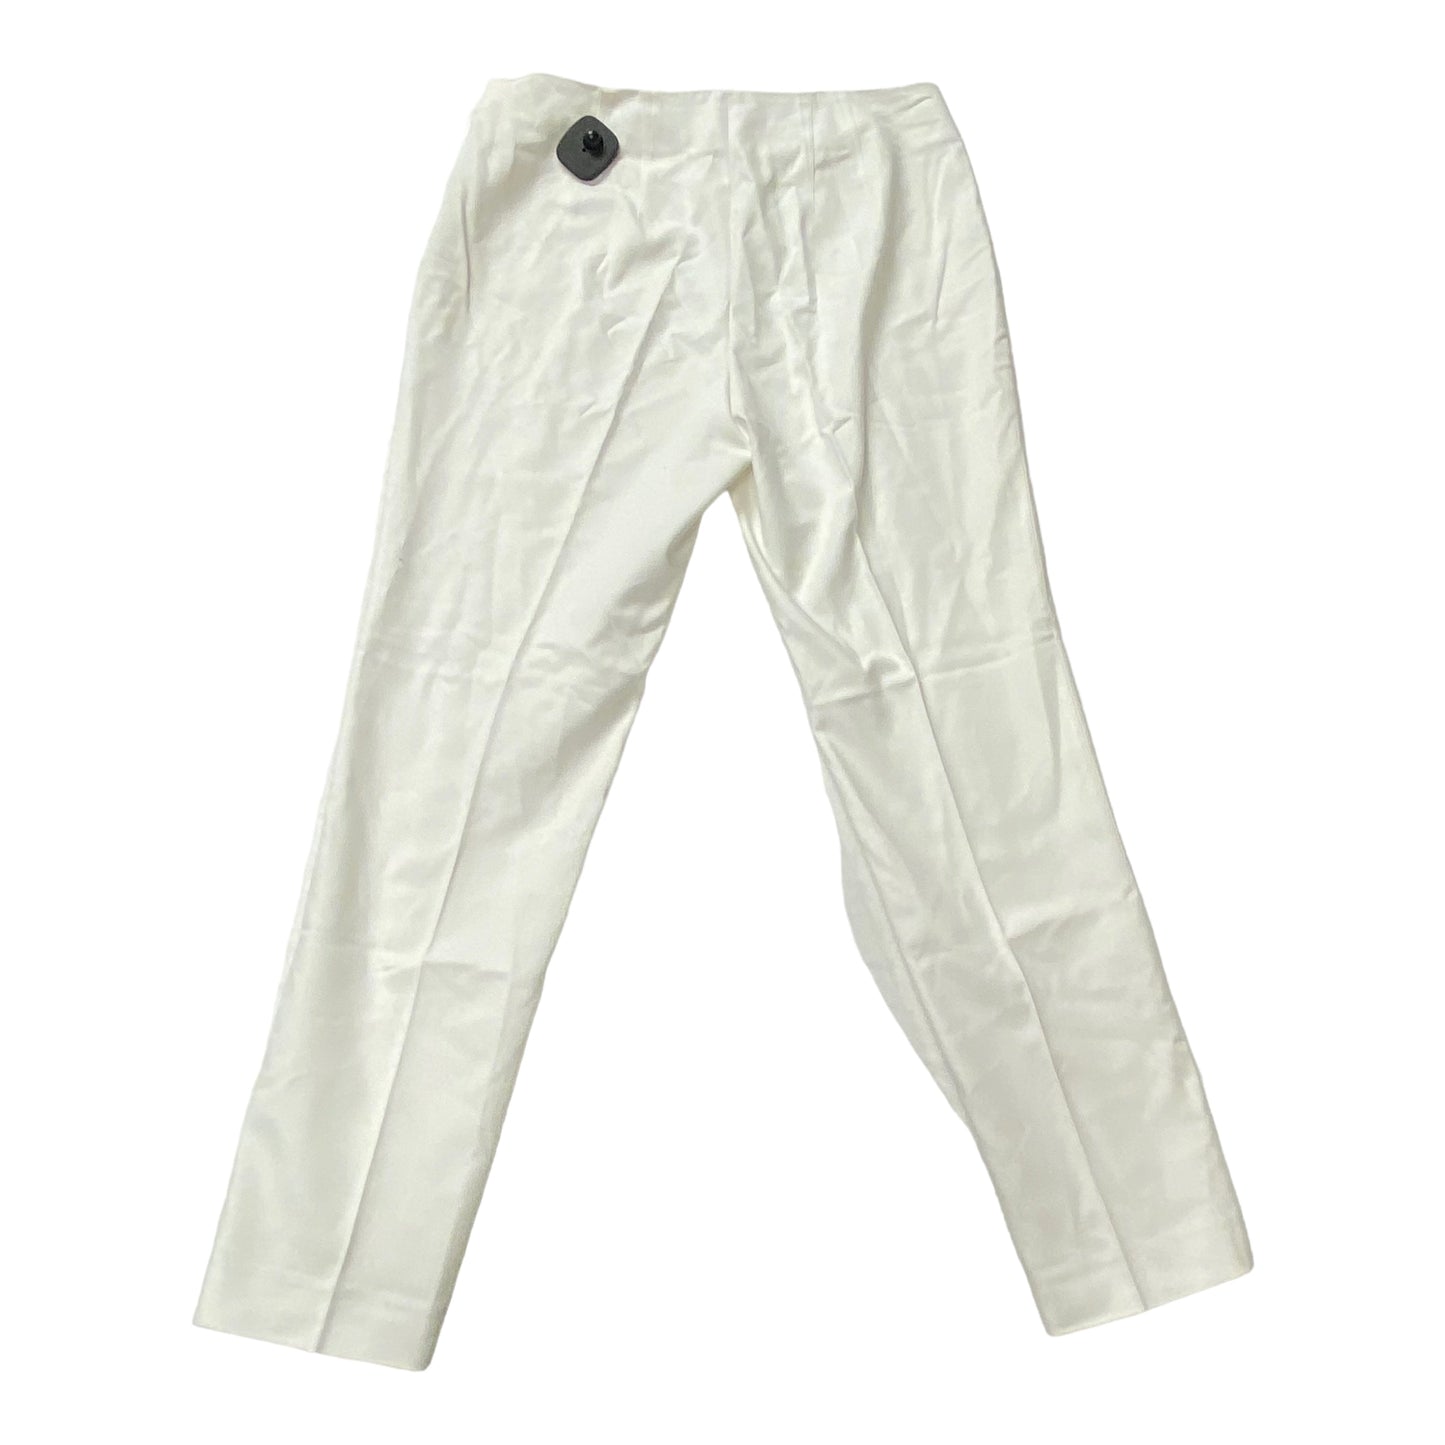 White Pants Cropped Vince Camuto, Size 6